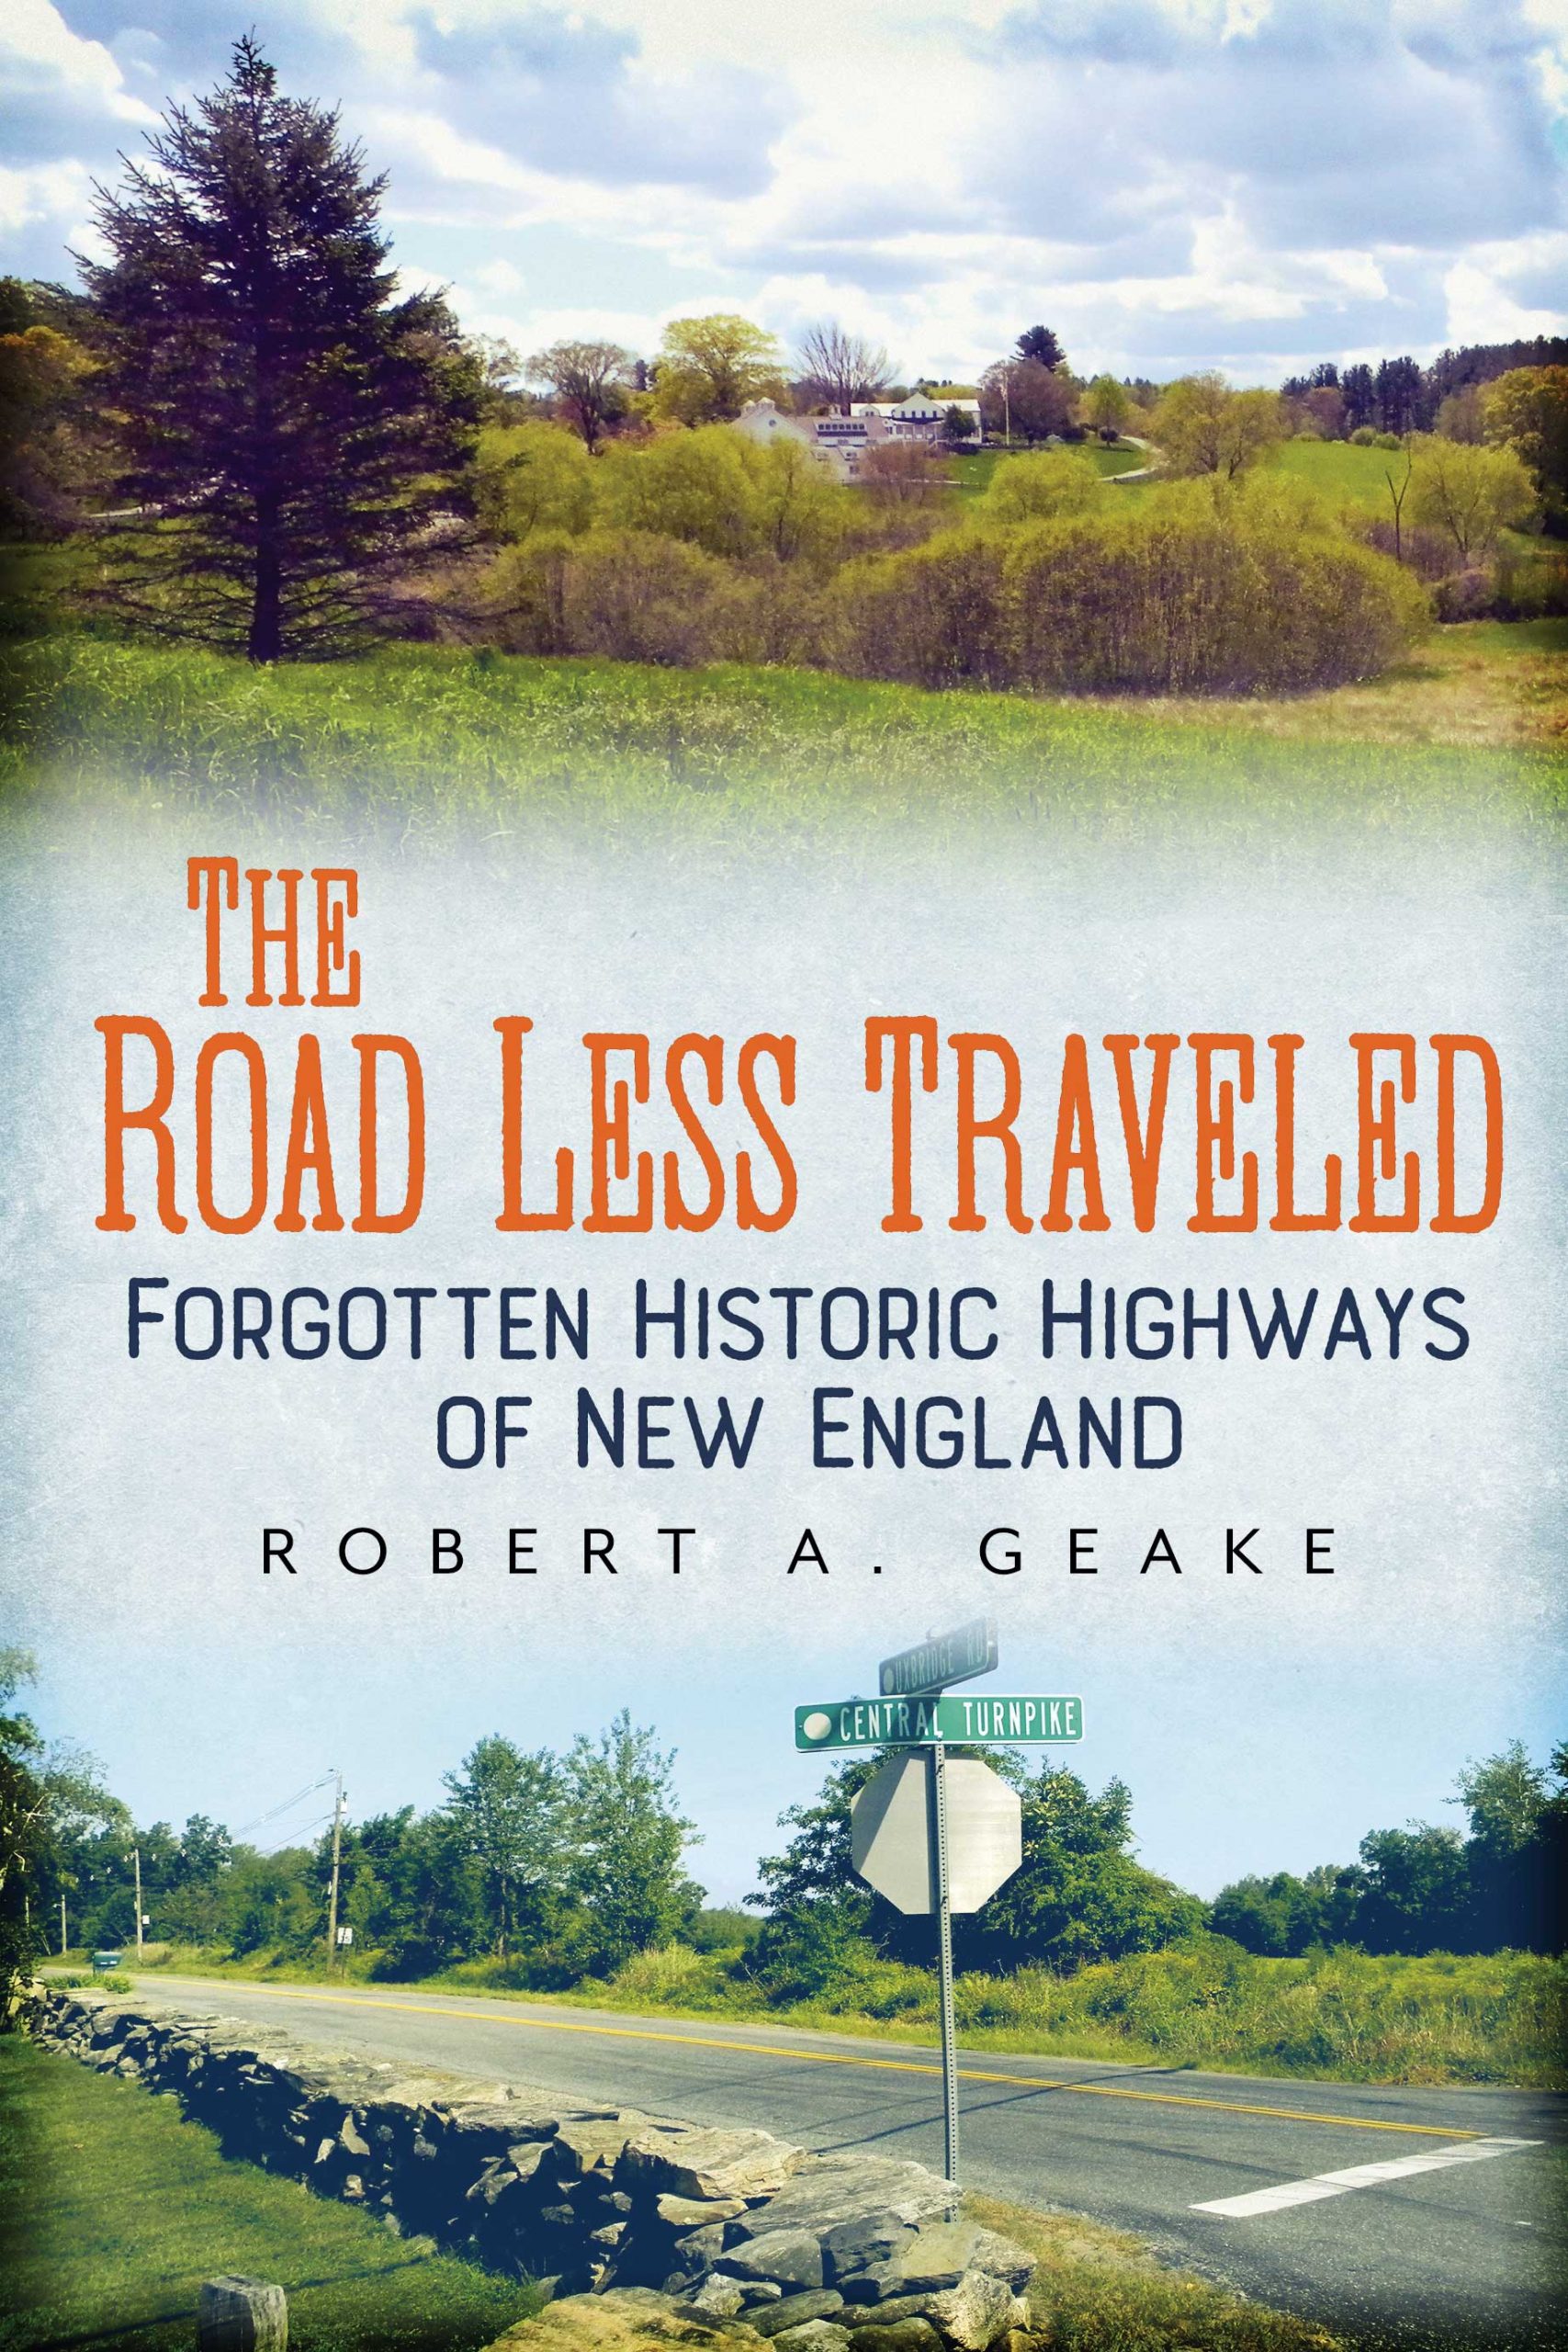 Travel the ‘forgotten highways’ of New England